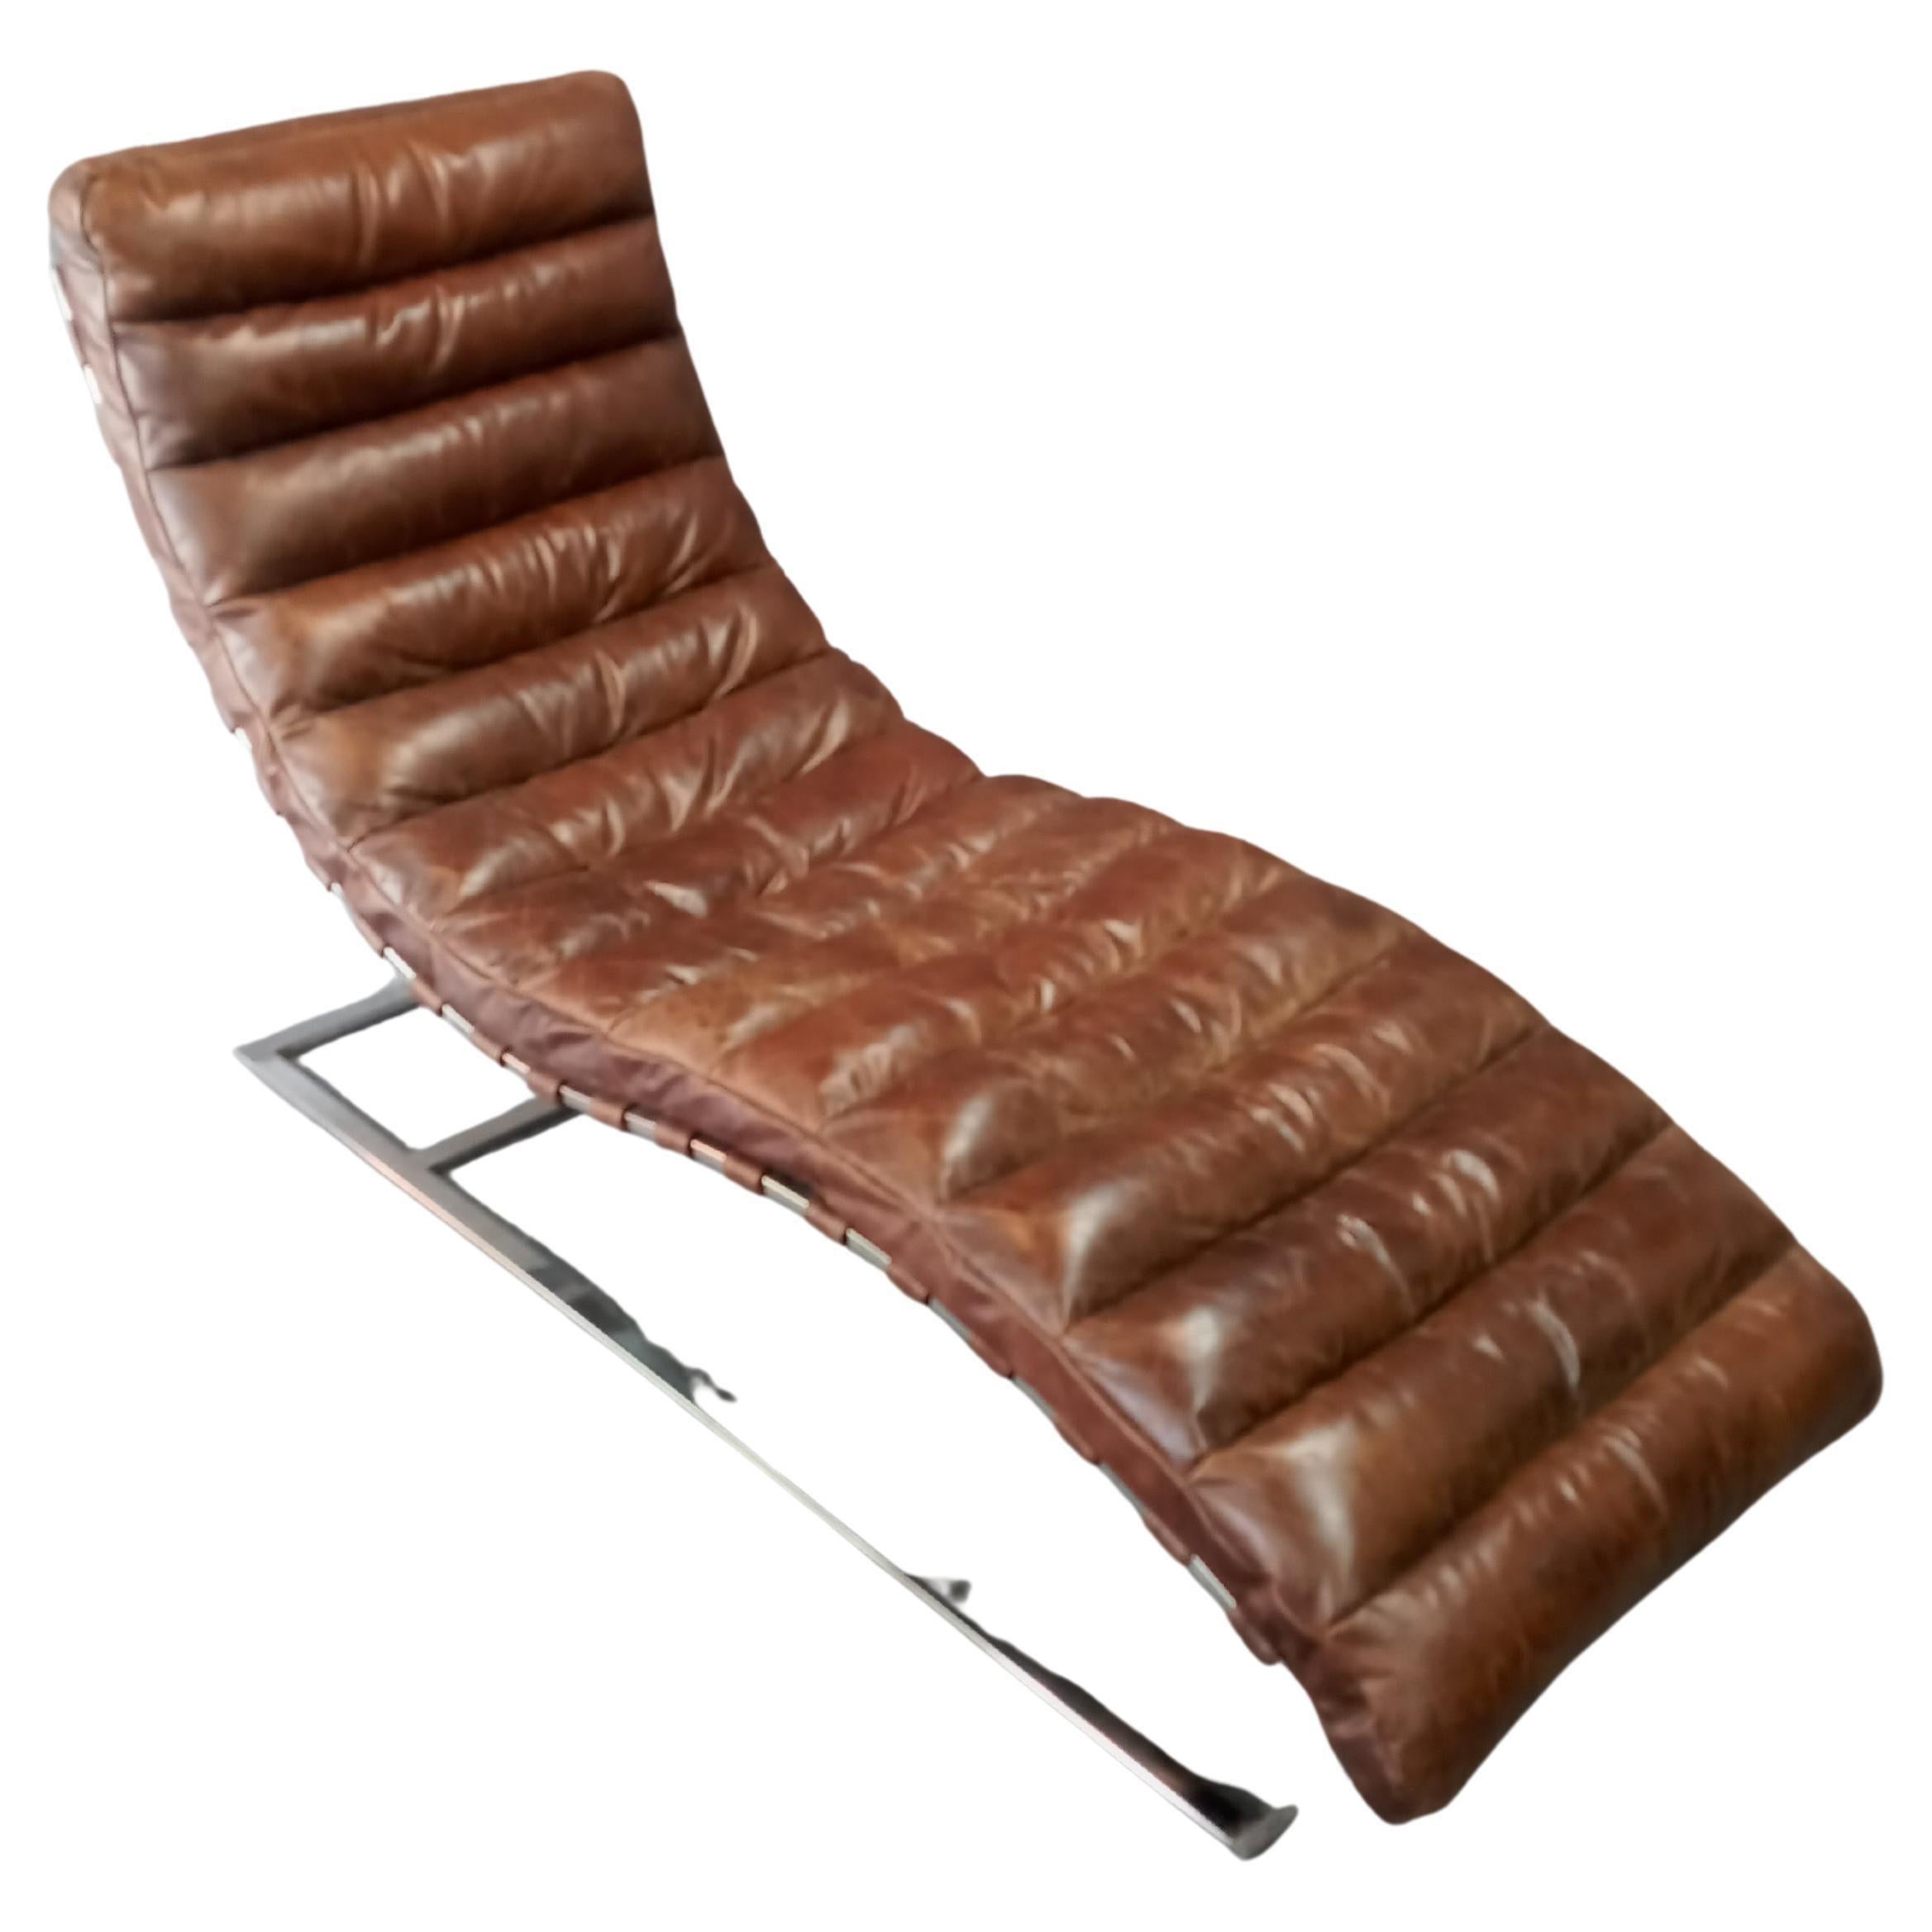 Contemporary Restoration Hardware Oviedo Leather & Chrome-Frame Chaise Lounge Chair